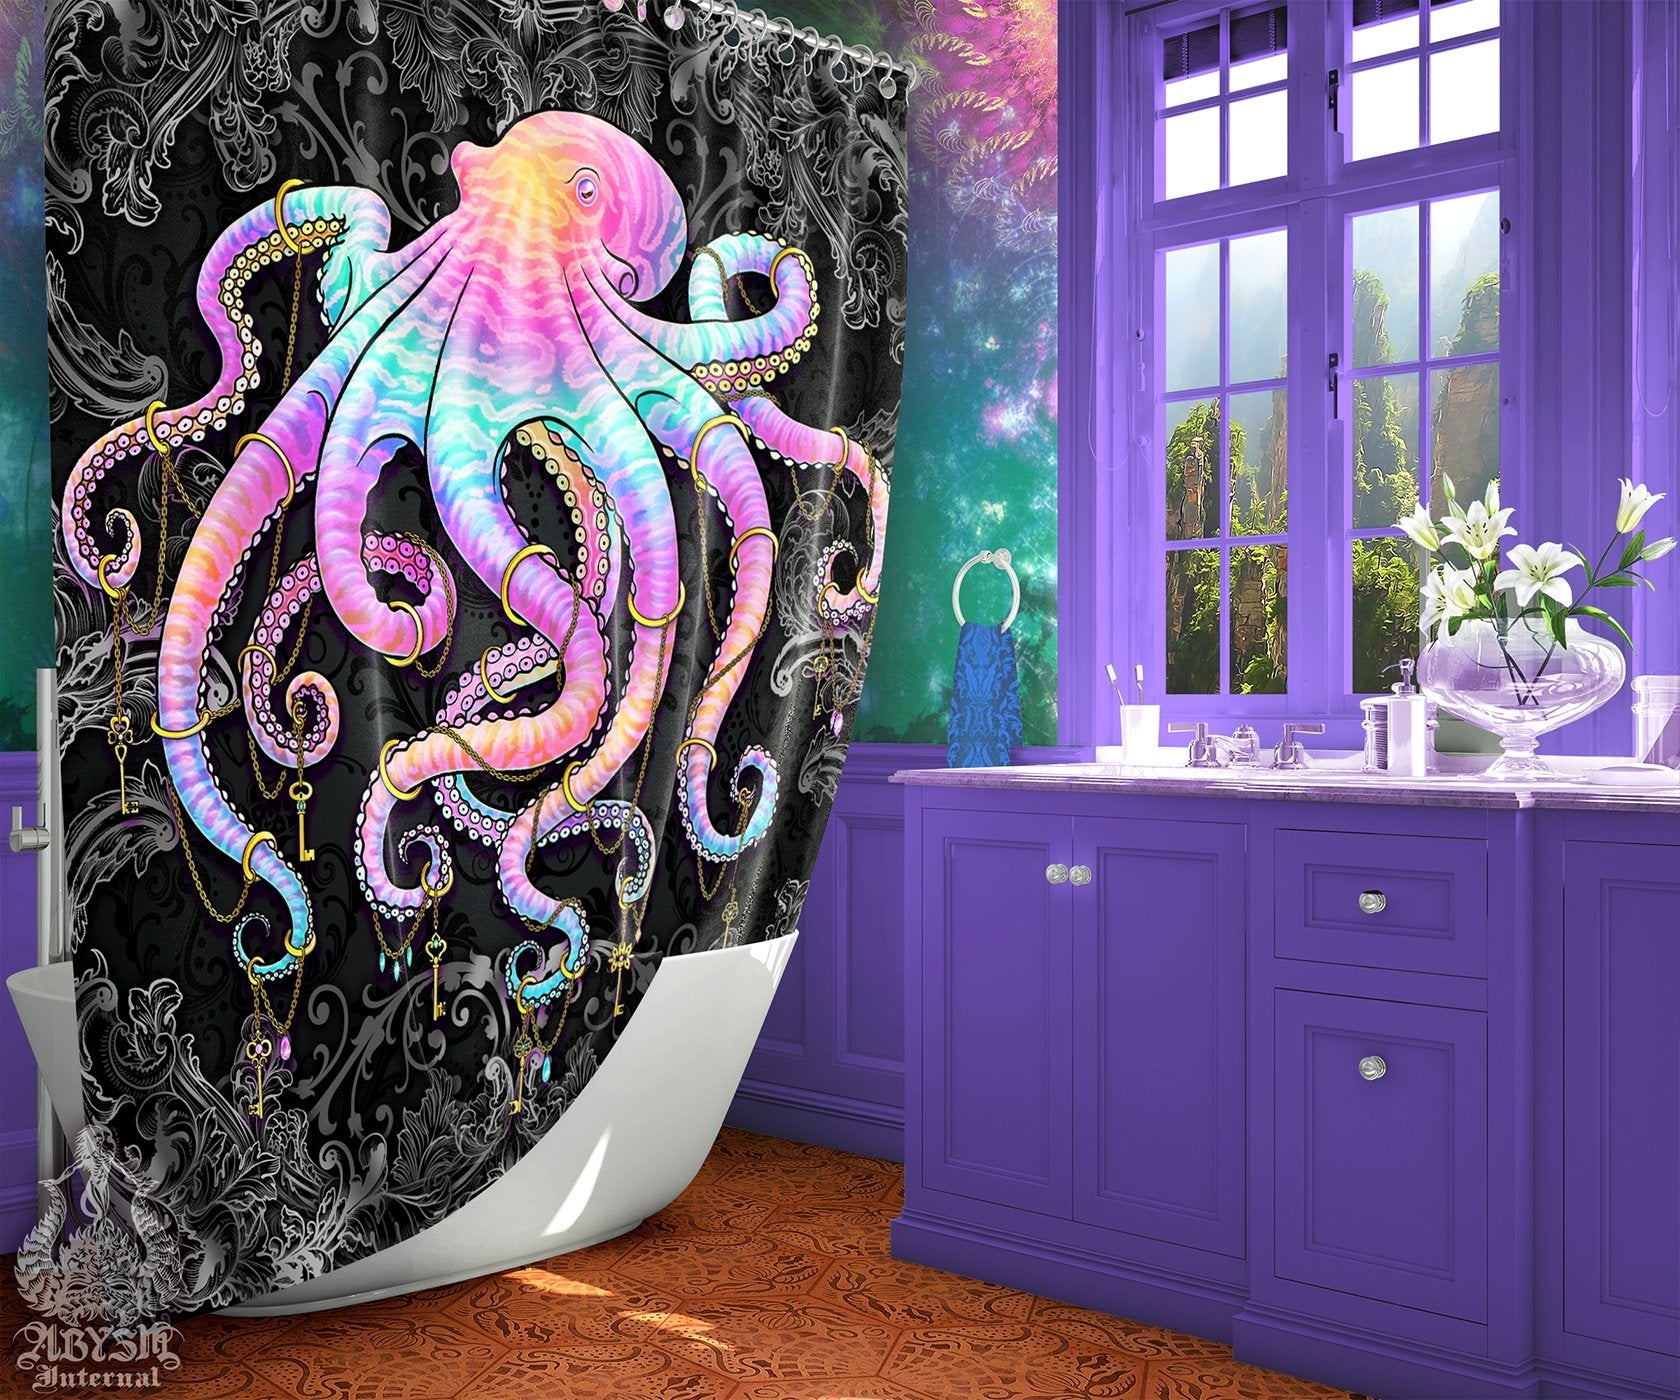 Octopus Shower Curtain, Indie and Alternative Bathroom Decor, Eclectic and Funky Home - Dark Pastel Punk - Abysm Internal